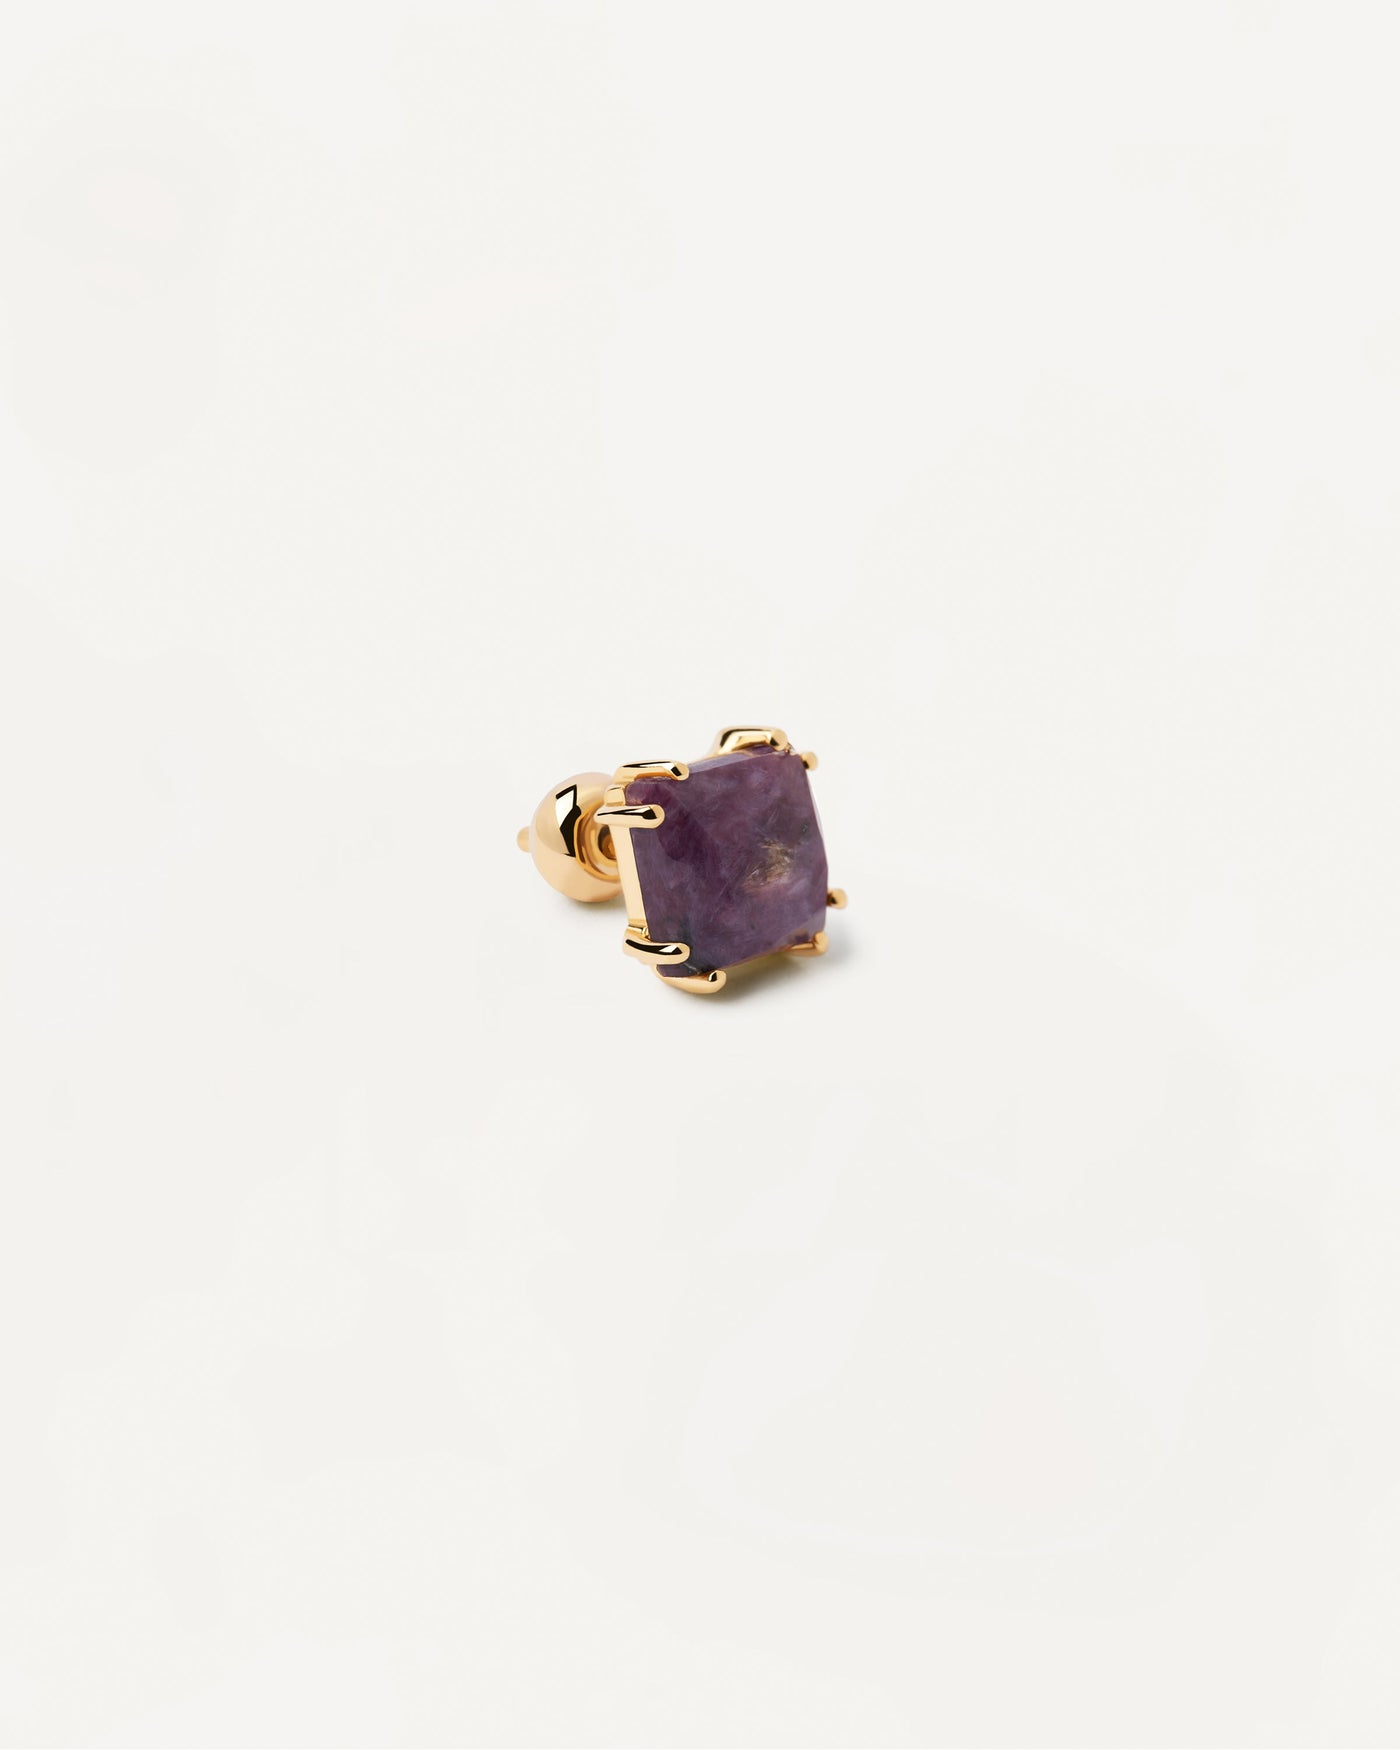 2023 Selection | Suki Charoite Single Earring. Gold-plated stud ear piercing with purple gemstone in Asscher cut. Get the latest arrival from PDPAOLA. Place your order safely and get this Best Seller. Free Shipping.